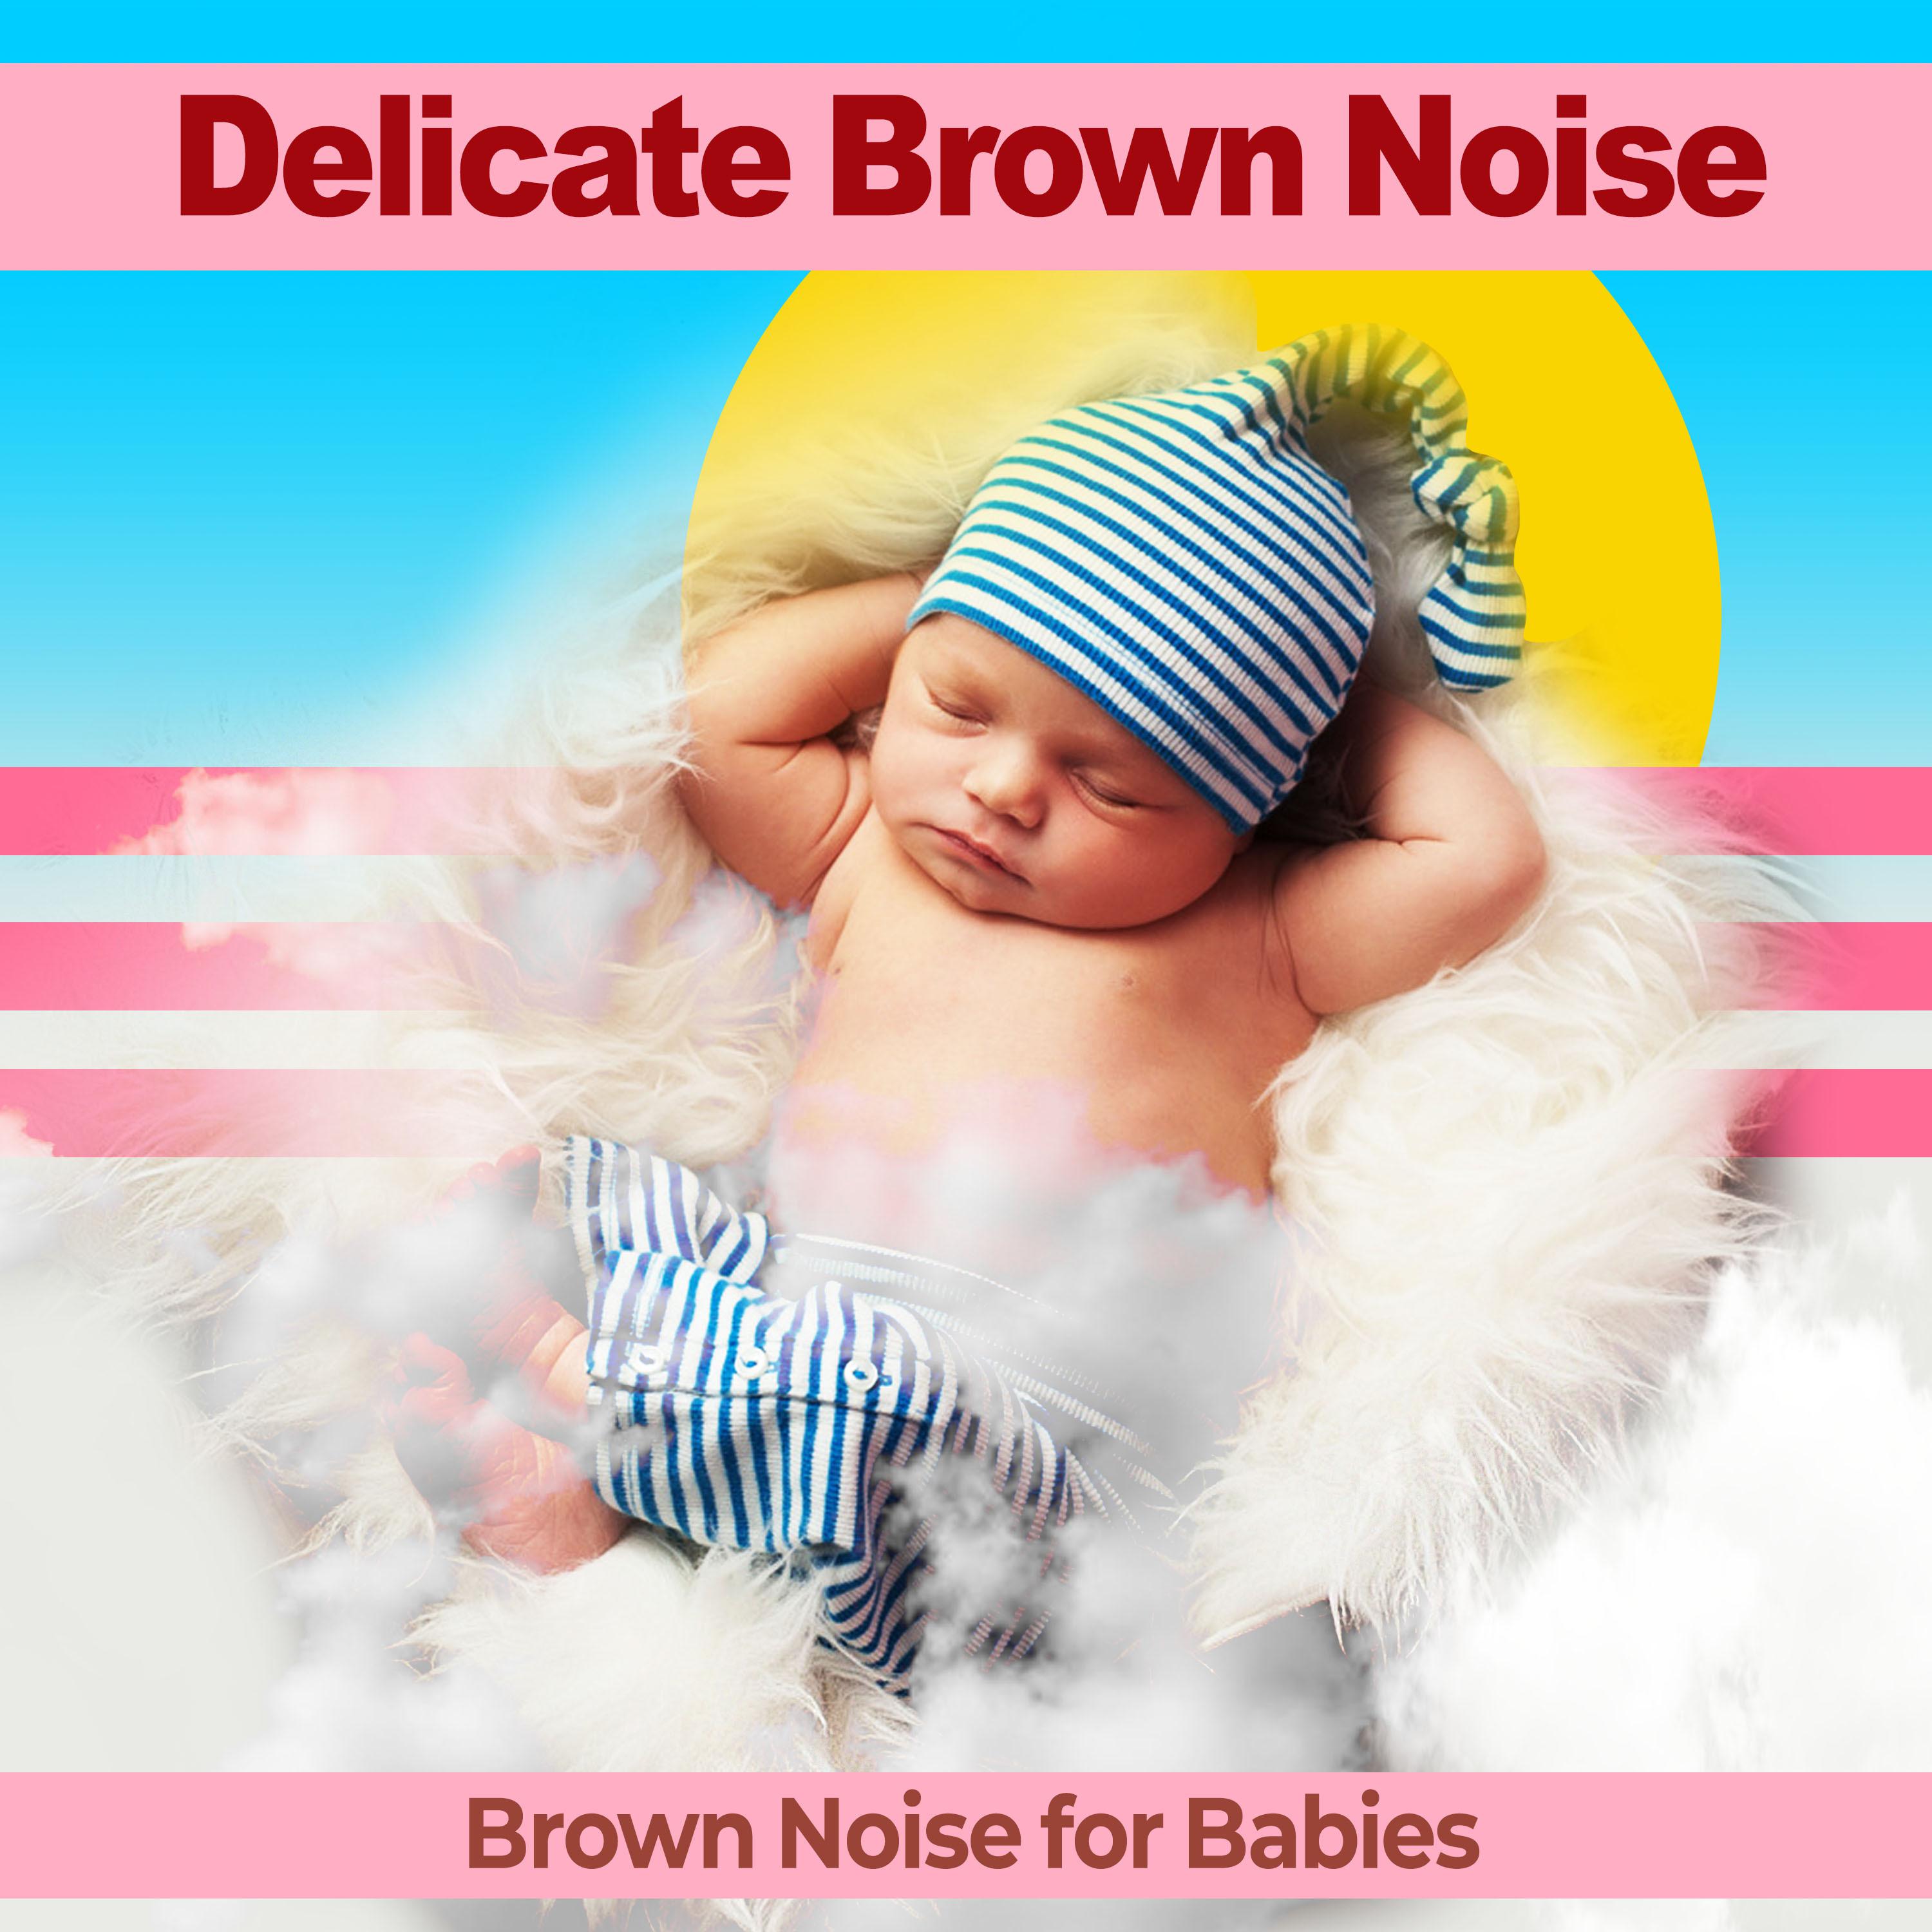 Delicate Brown Noise